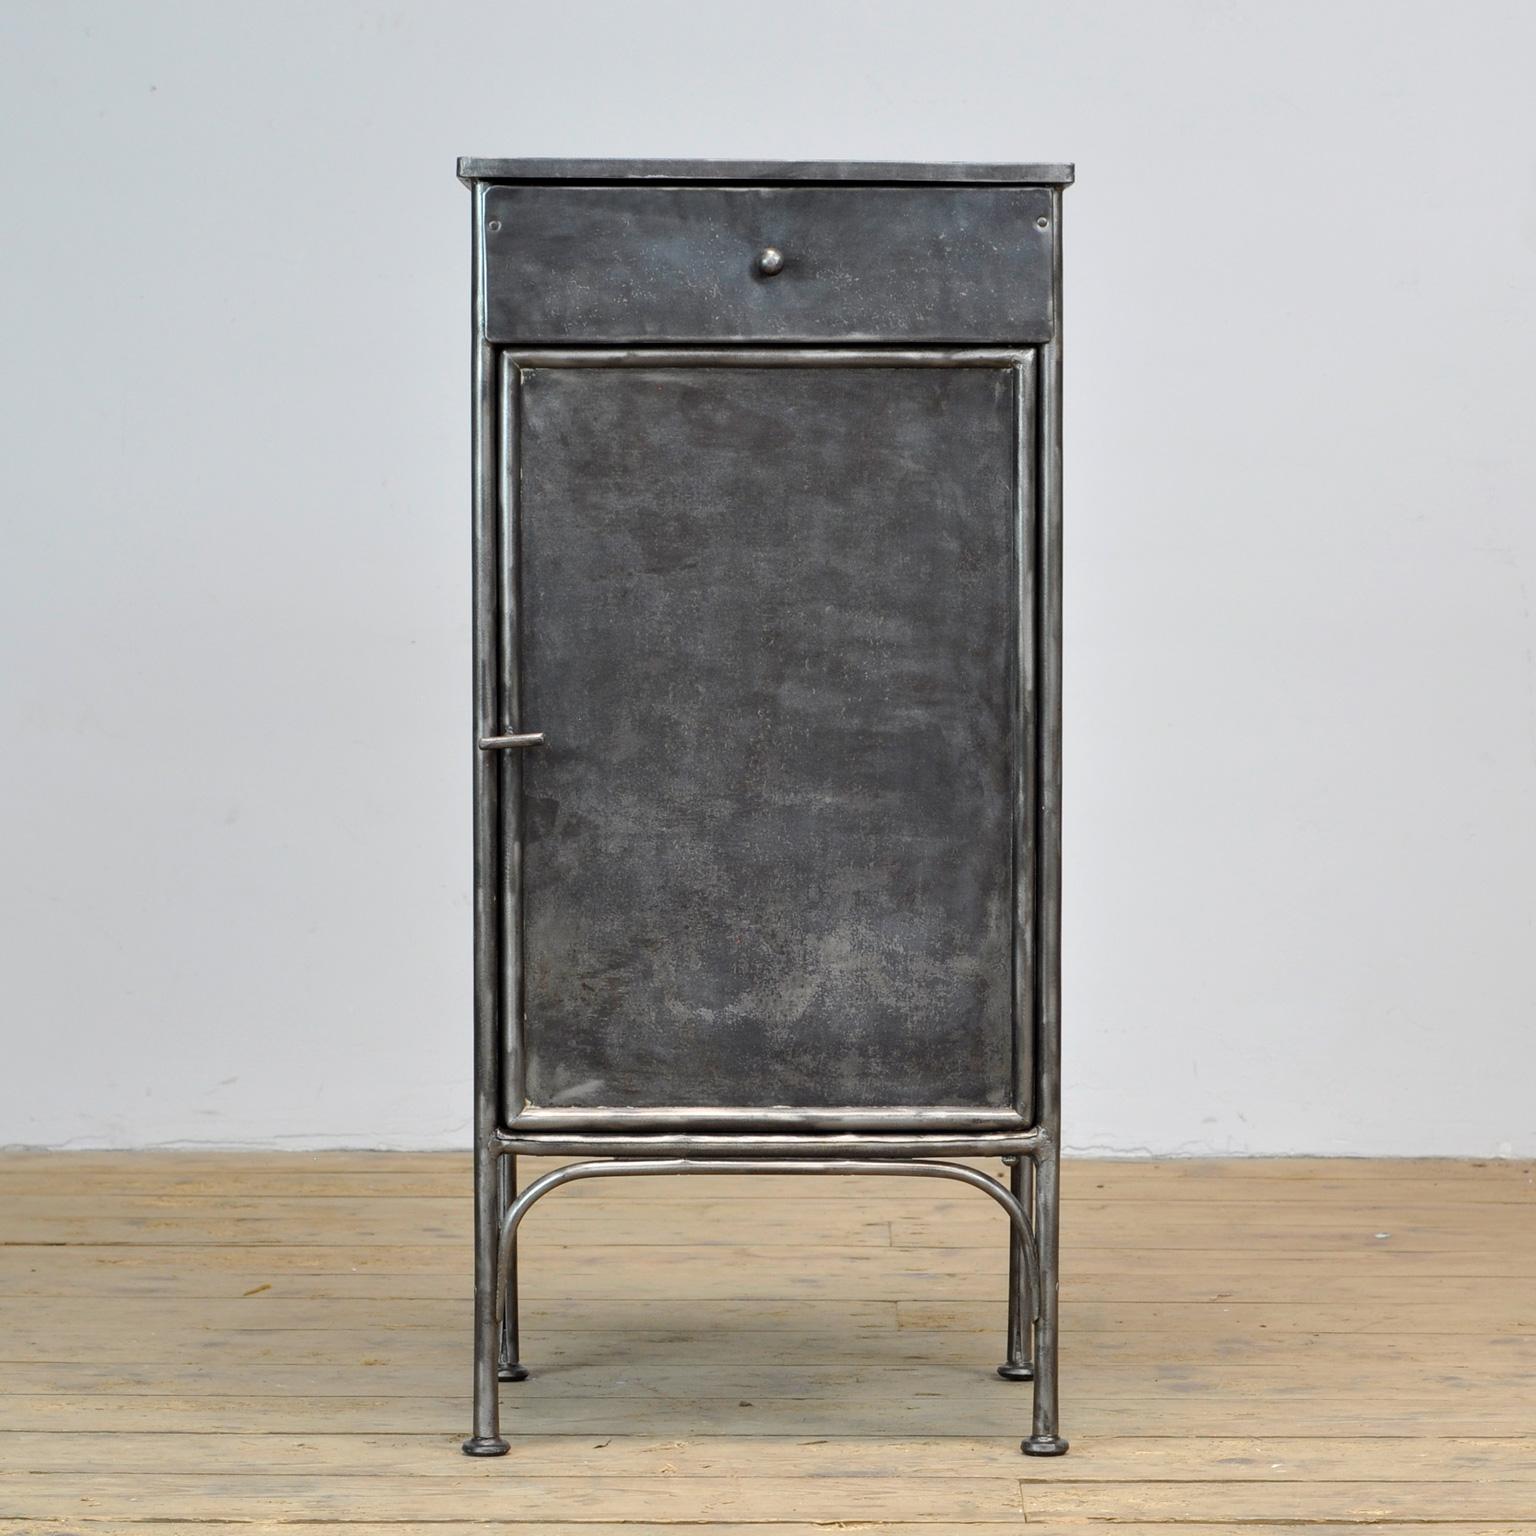 Polished iron hospital bedside cabinet. Produced in the 1910's.
 